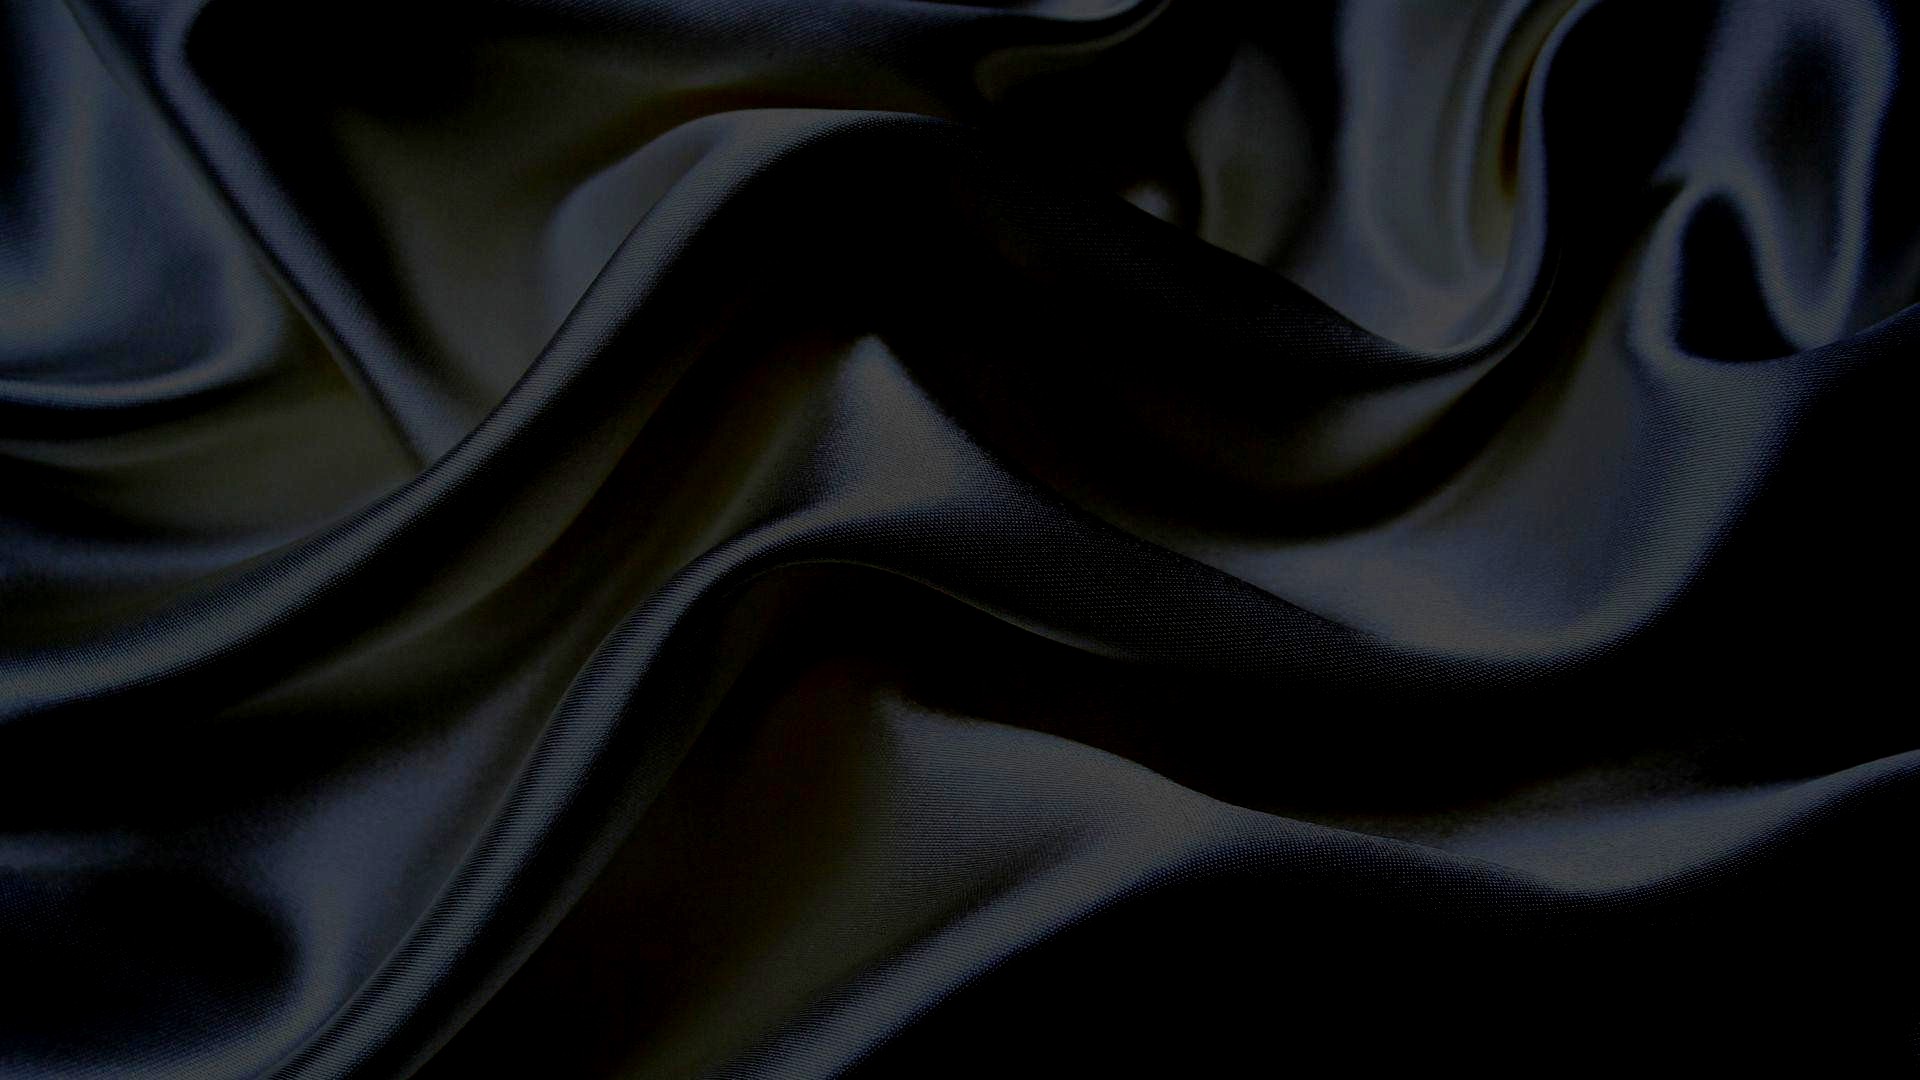 Black Silk HD Wallpapers For Android with high-resolution 1920x1080 pixel. You can use this wallpaper for your Android backgrounds, Tablet, Samsung Screensavers, Mobile Phone Lock Screen and another Smartphones device